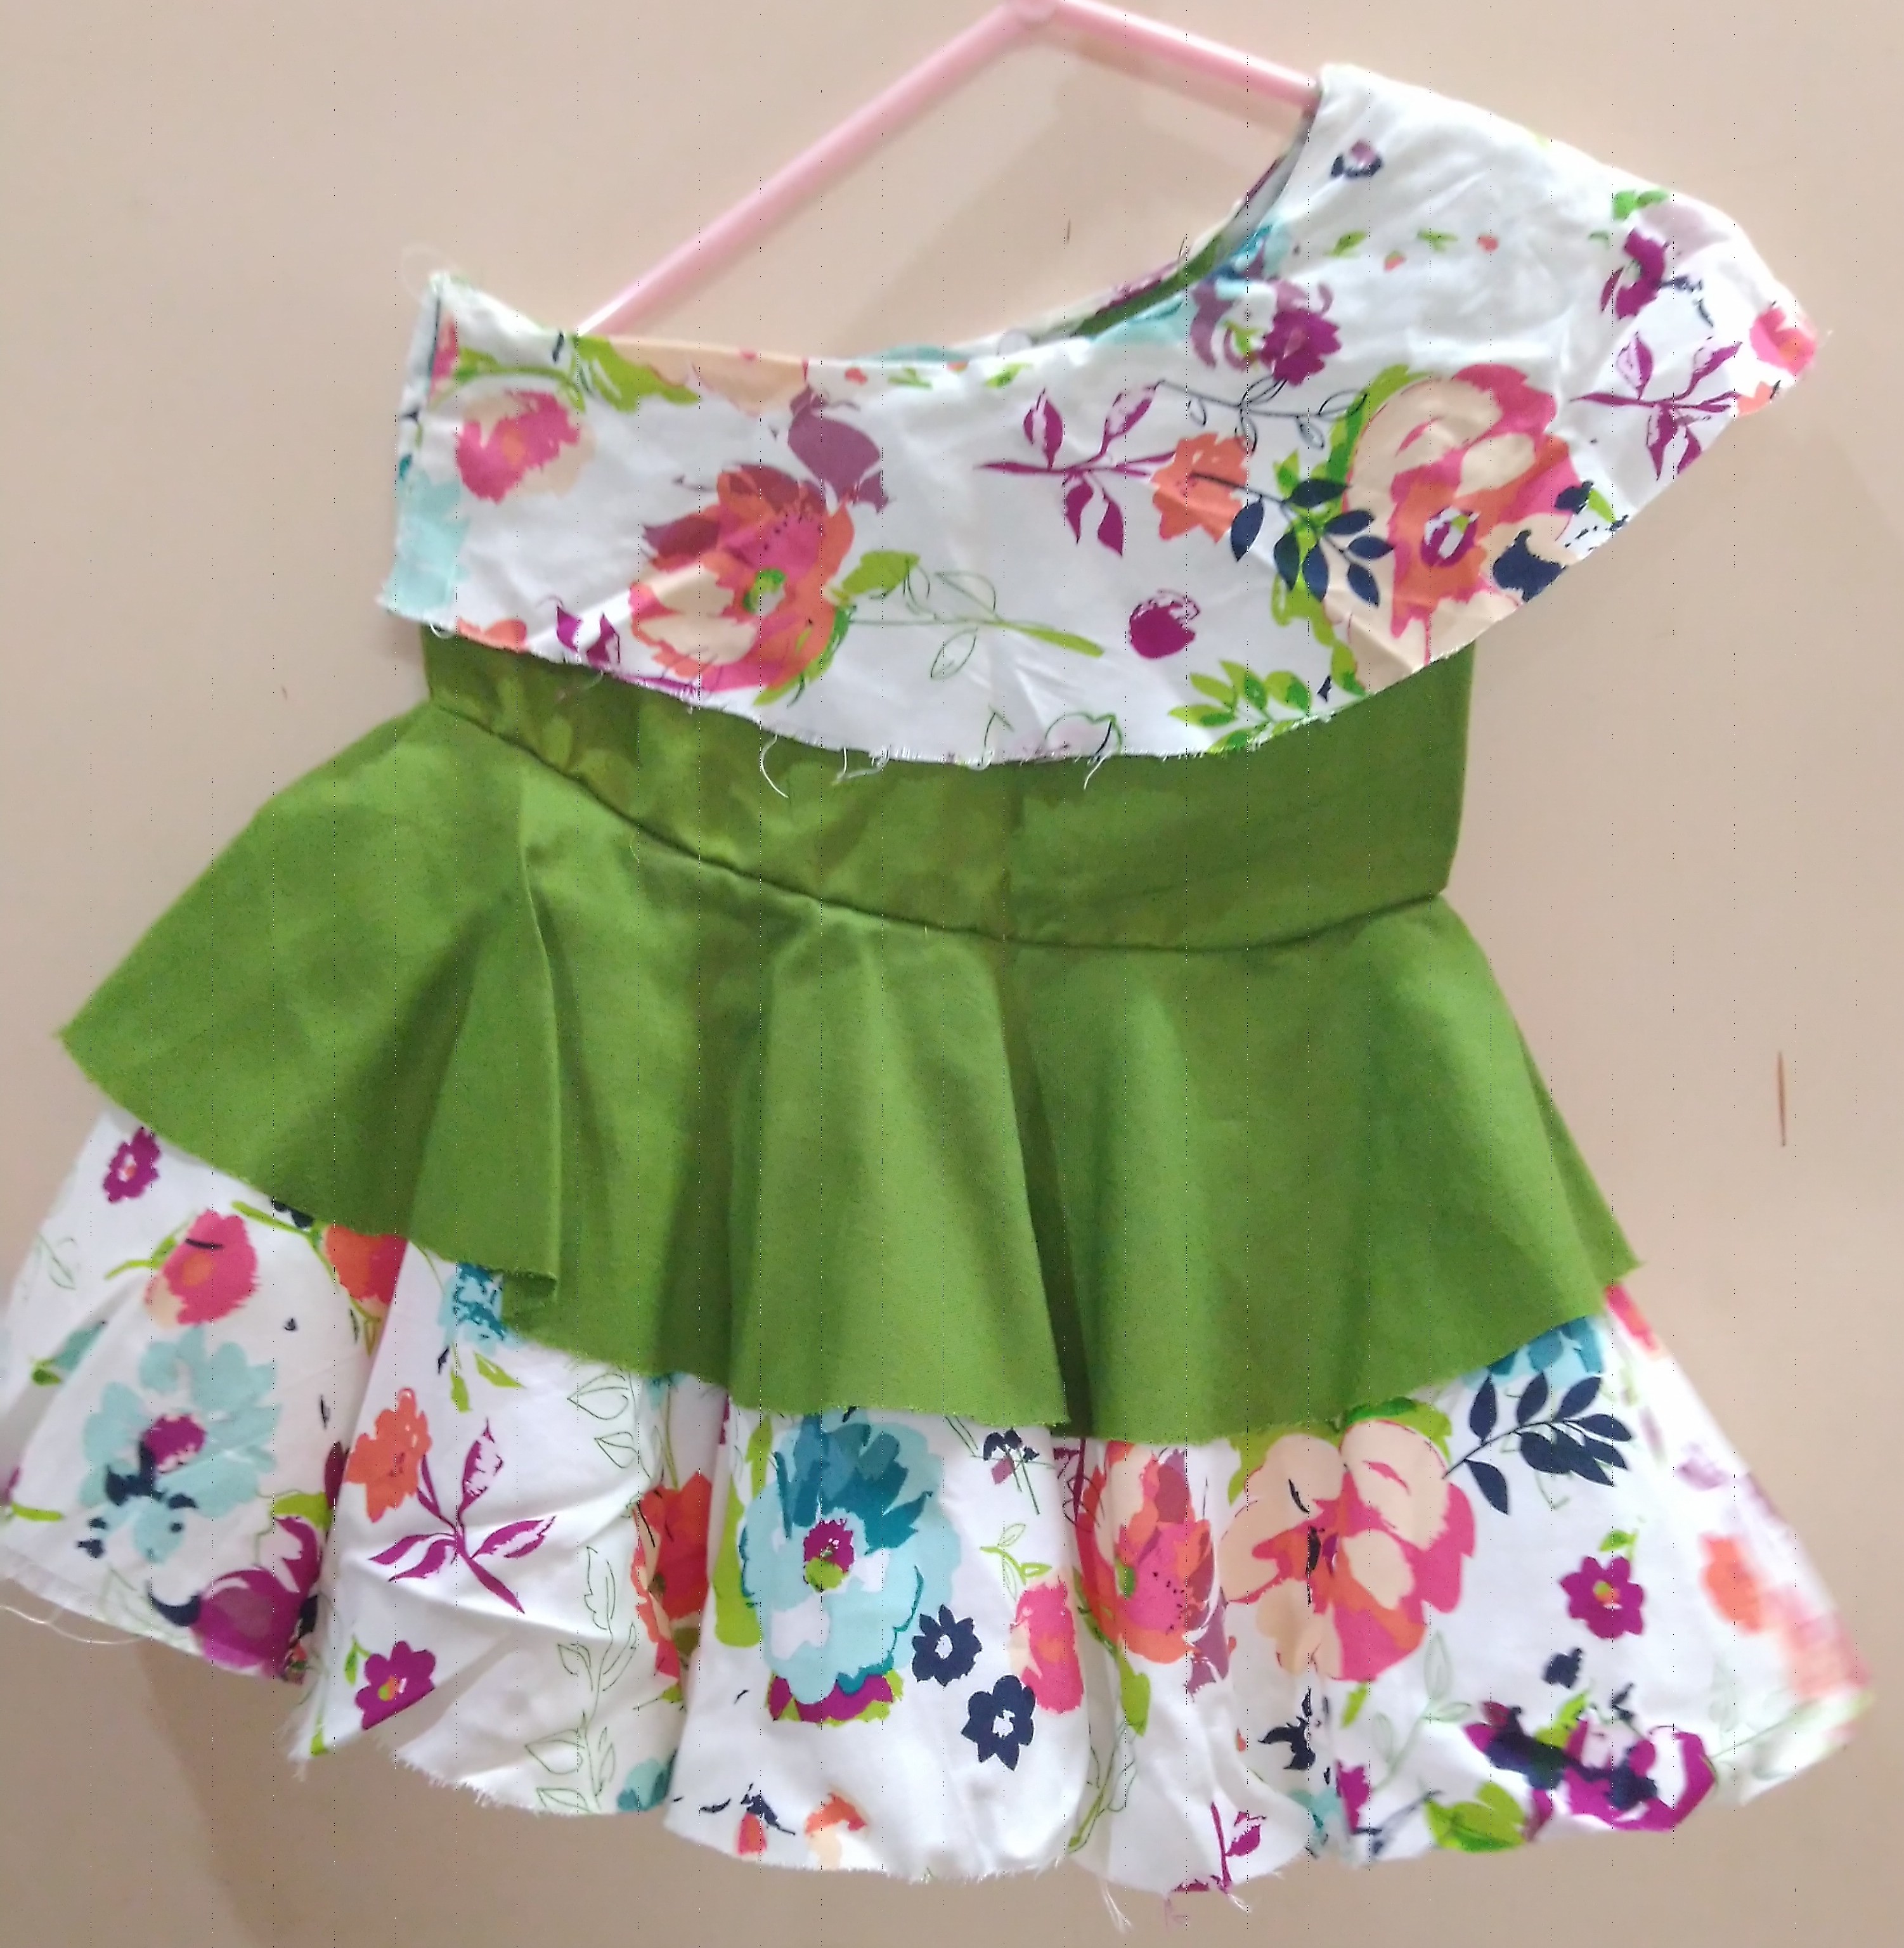 How to Stitch New Model Kids Frock ? | Chennai fashion designing Technology Institute